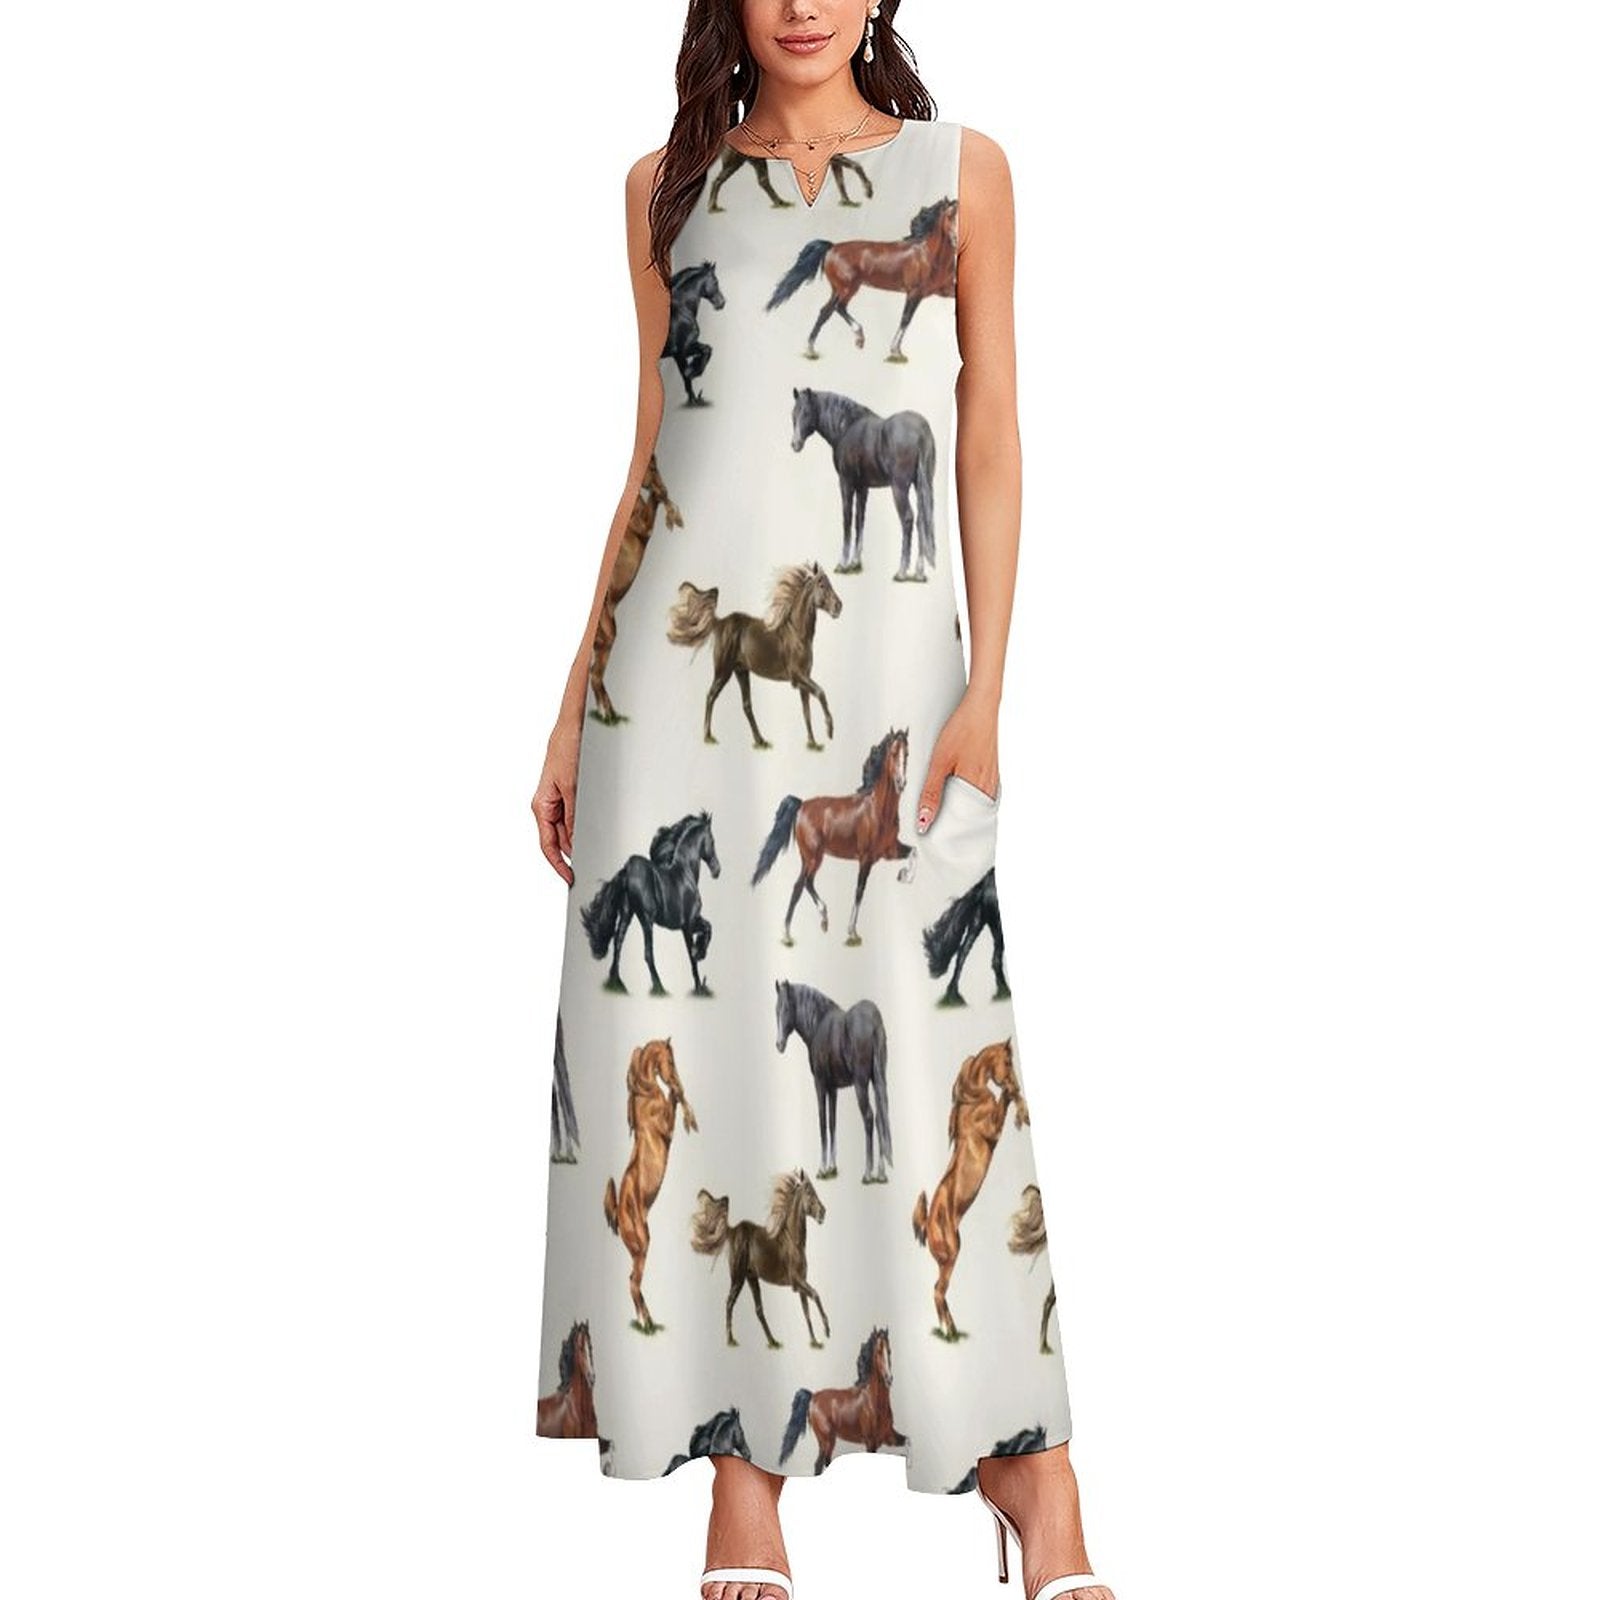 Dress-of-horse-in-cotton